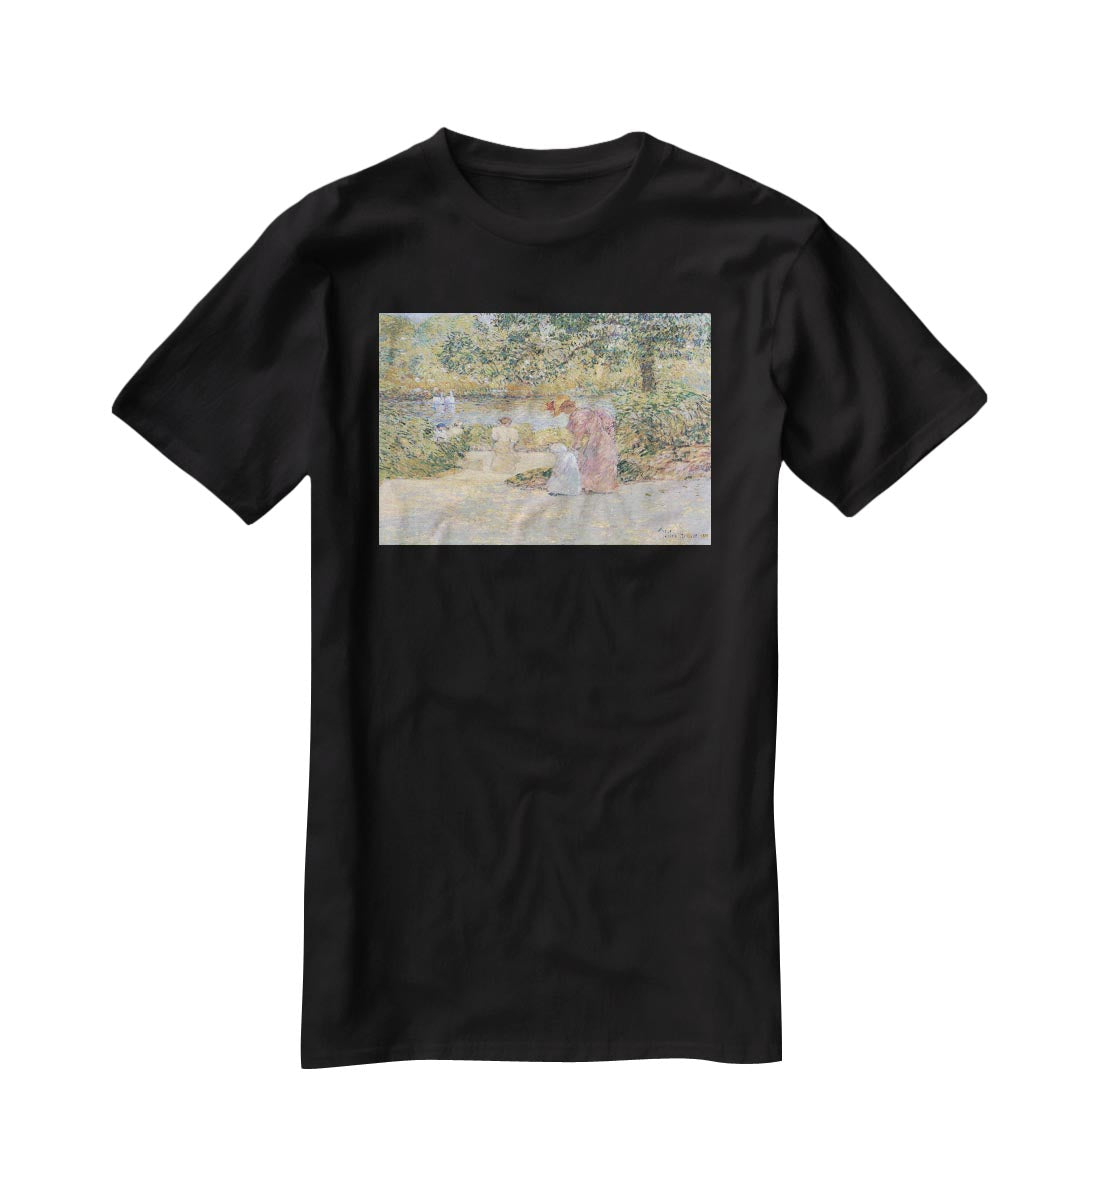 The staircase at Central Park by Hassam T-Shirt - Canvas Art Rocks - 1